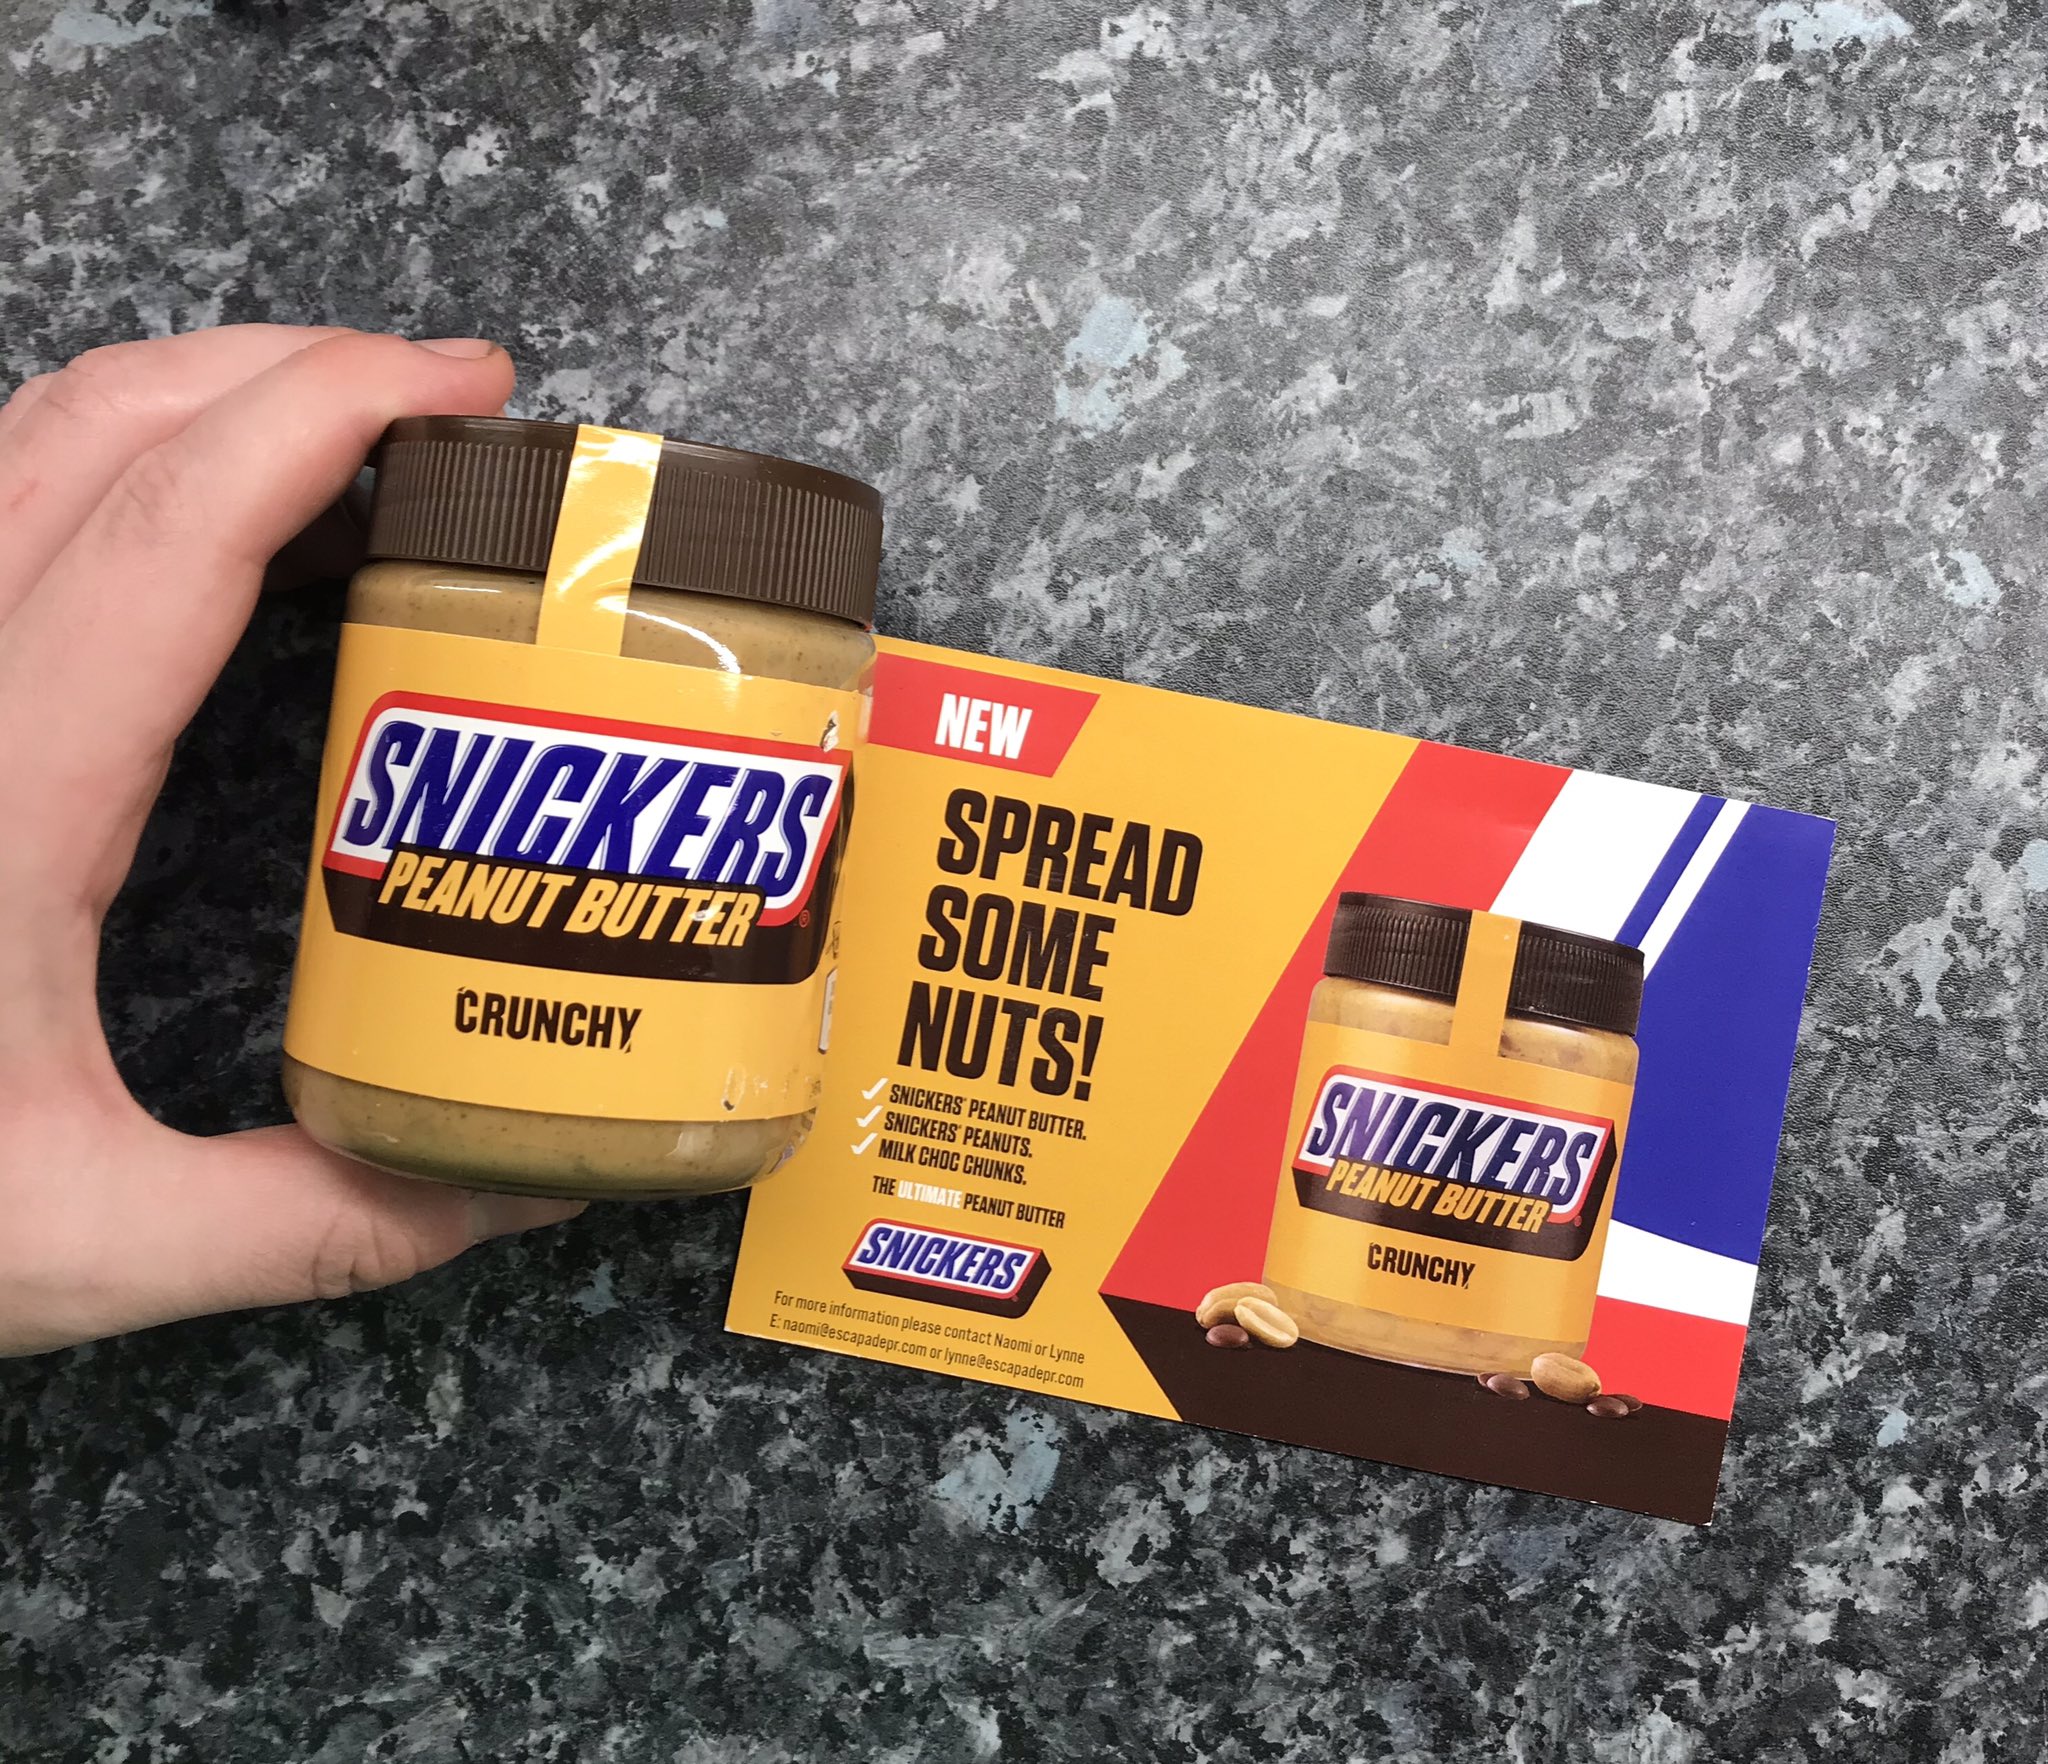 Well This Is New on X: M&M's and Snickers Peanut Butter! @mmsuk  @SNICKERSUK #mandms #snickers #peanutbutter #wellthisisnew   / X